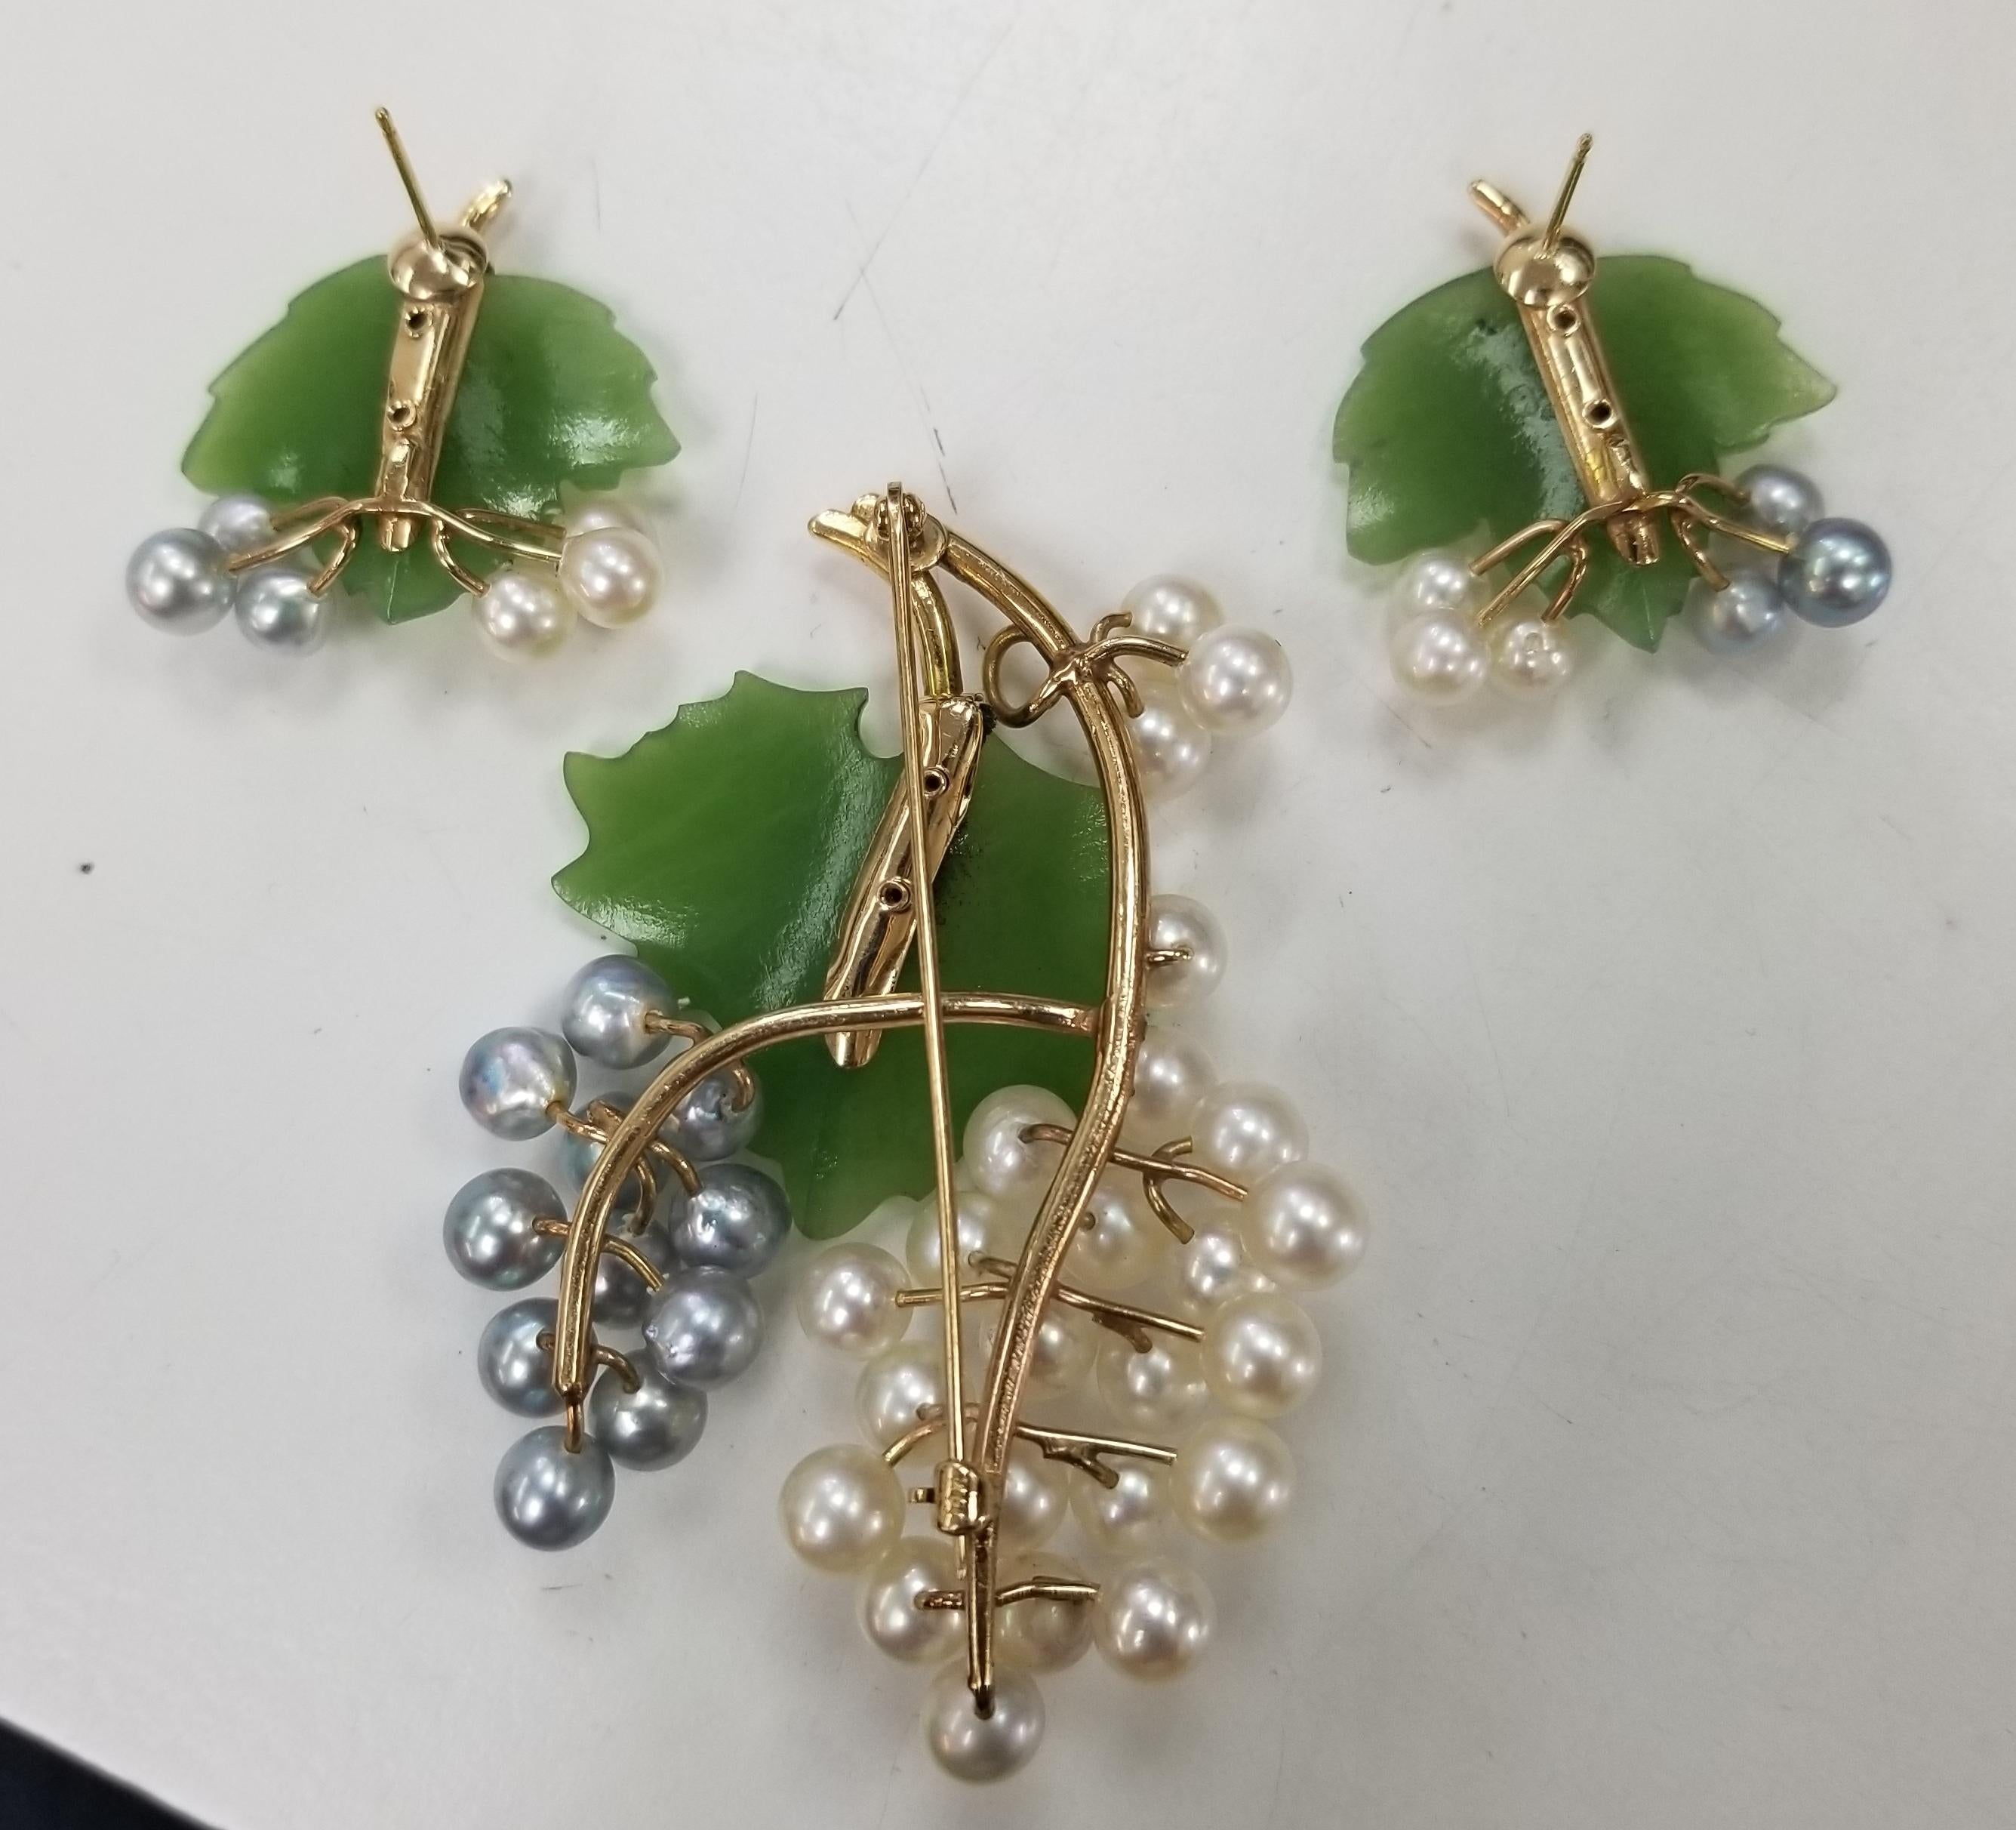 This gorgeous, Mid Century vintage brooch,  features carved nephrite and pearls in a 14 karat gold floral motif. 
There are two (2) carved nephrite jade leaves, each carved by hand and 37 pearls measuring 5-6mm(the piece is old enough that the